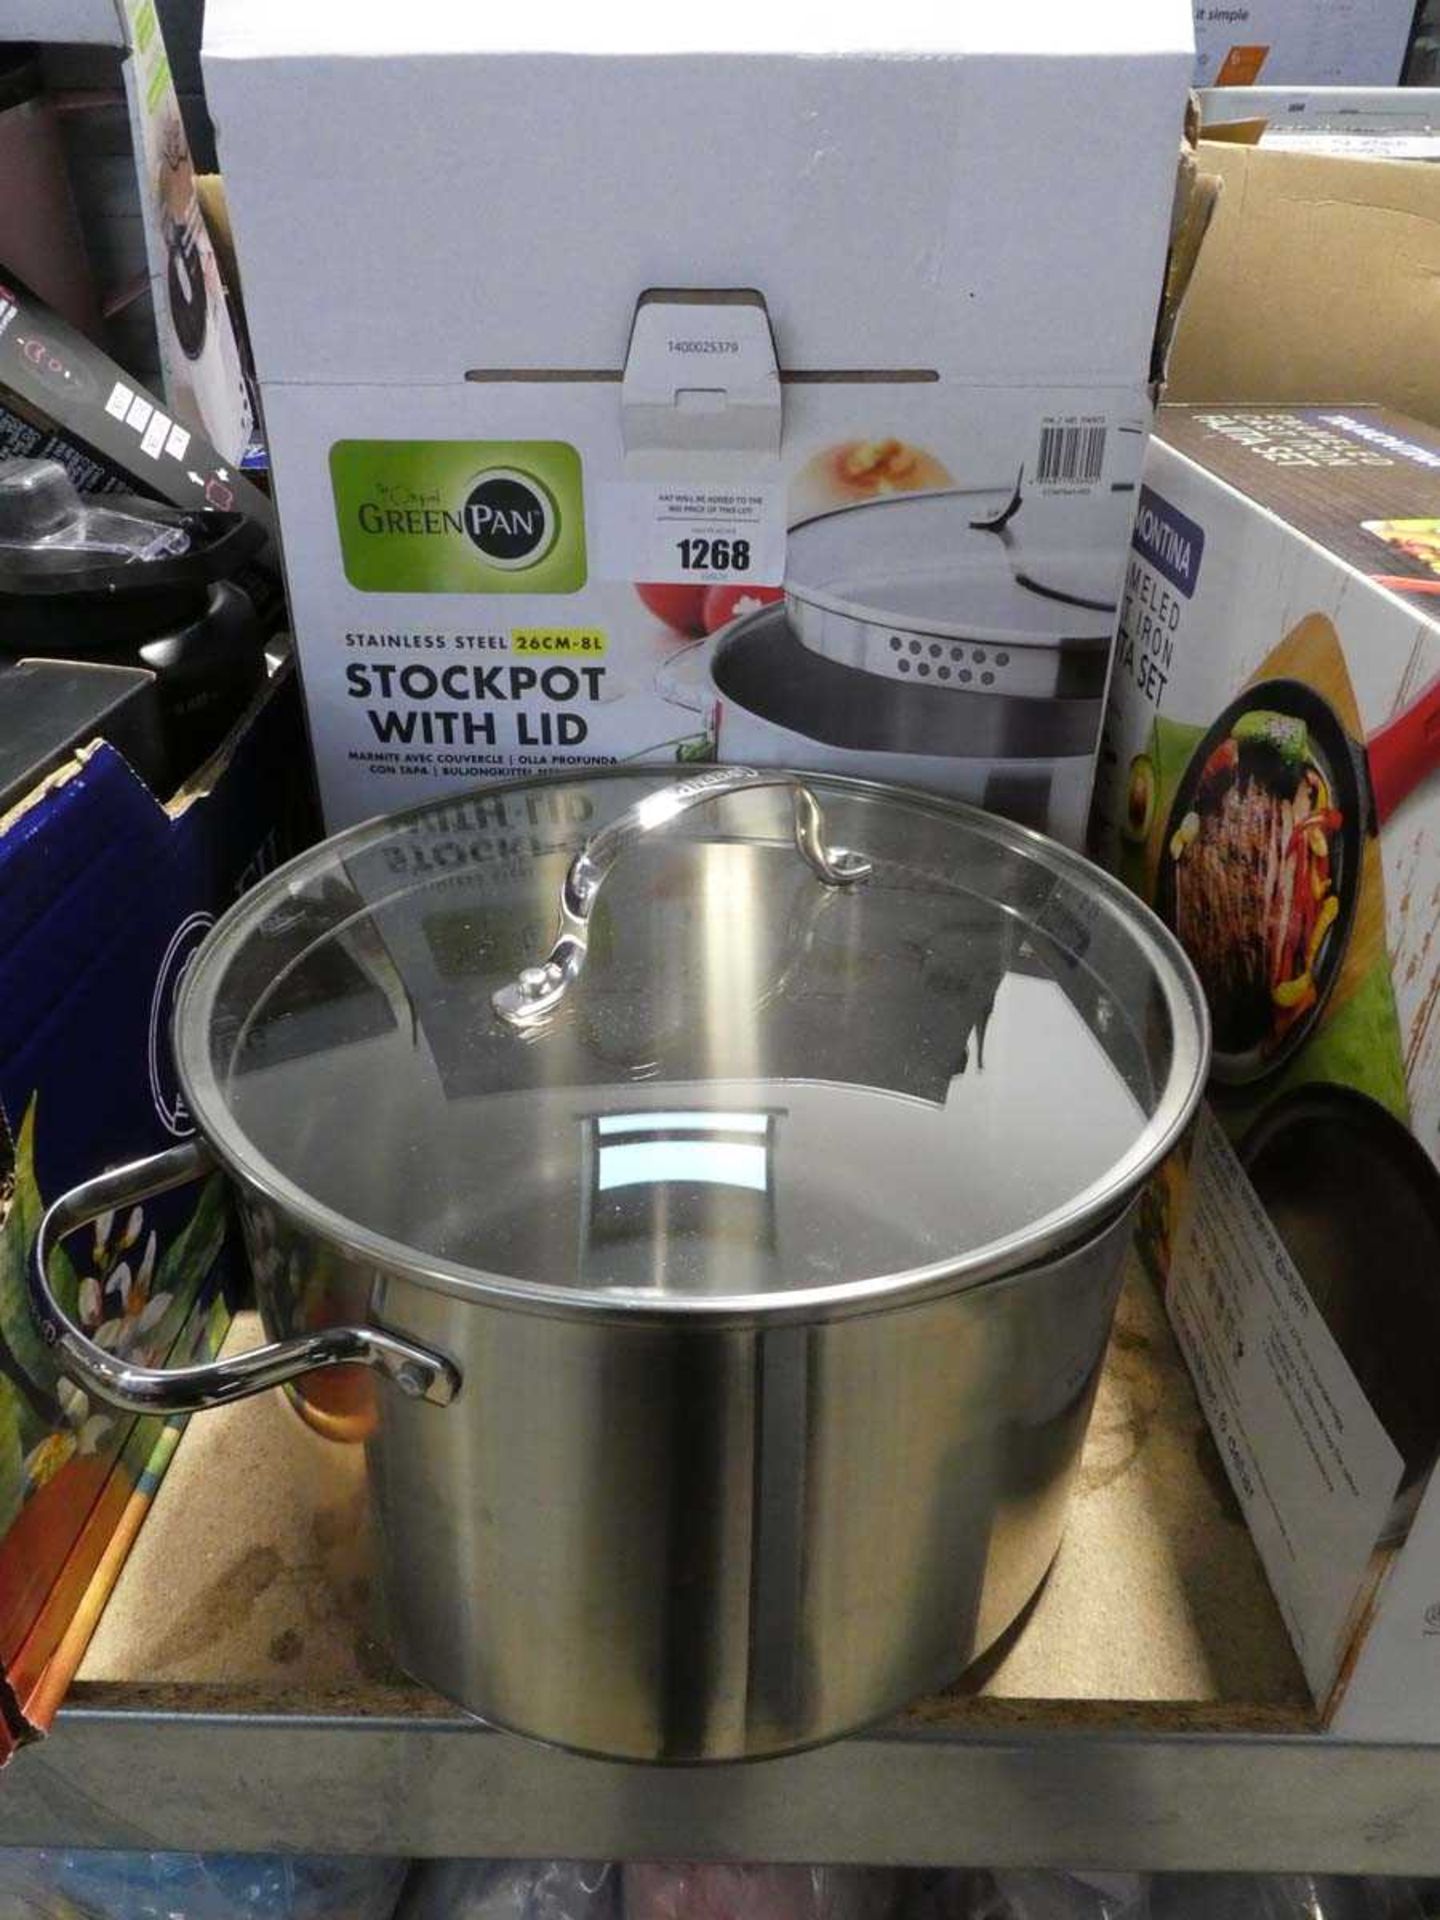 +VAT 2 GreenPan stockpots with lids - 1 boxed, 1 unboxed